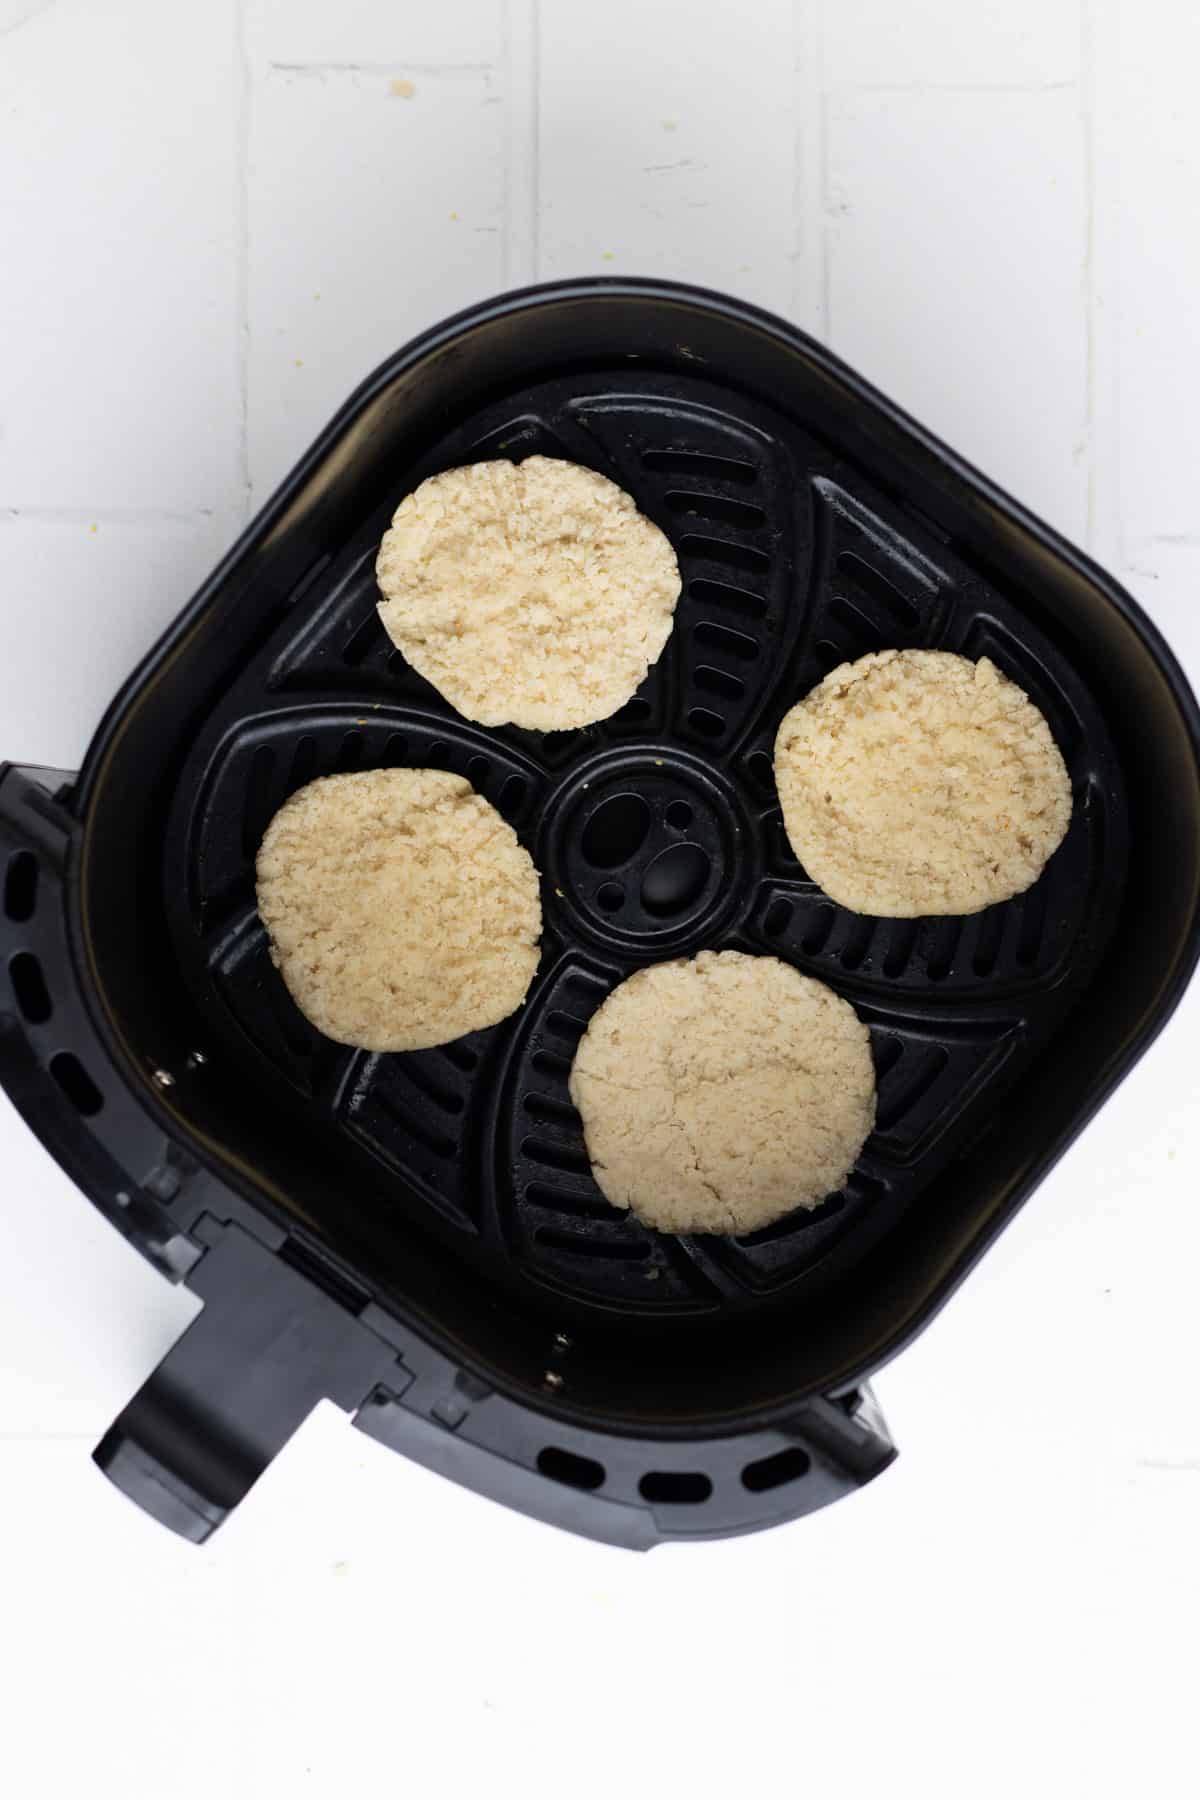 Four halves of untoasted English muffins in the air fryer.